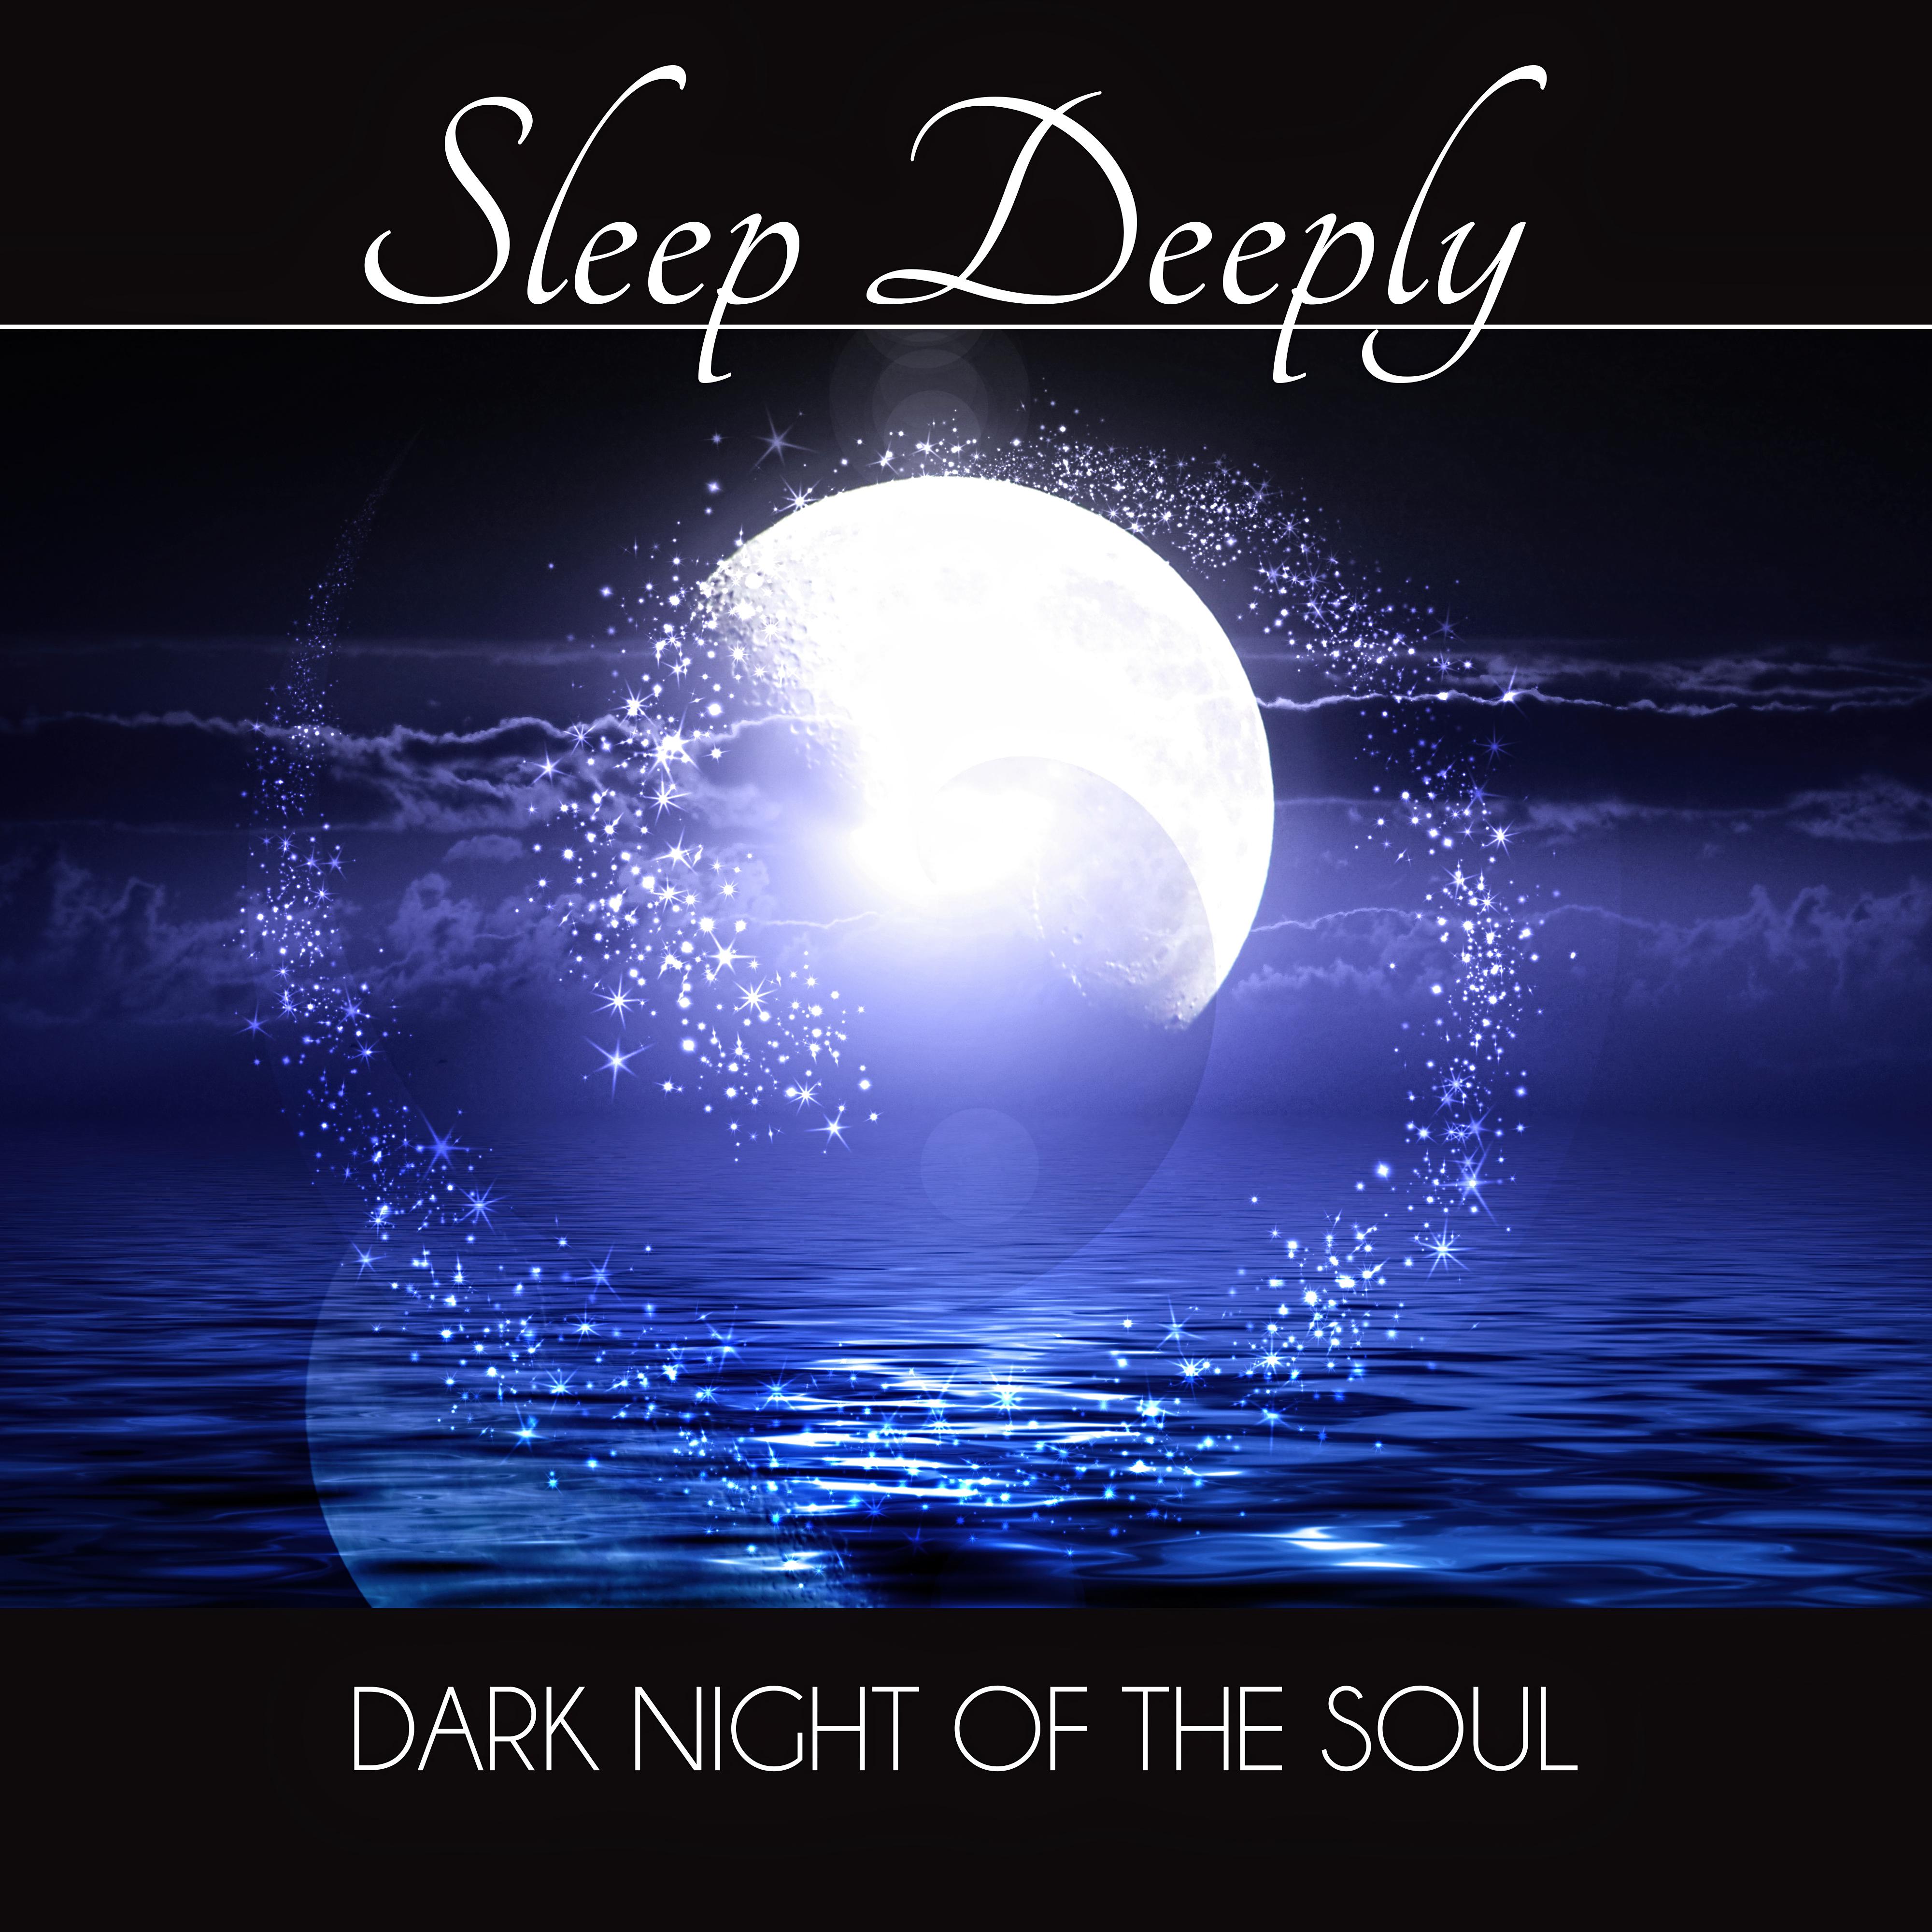 Sleep Deeply - Dark Night of the Soul, Deep Sleep, Soothing Piano Sounds, Restful Sleep, Stress Relief, Trouble Sleeping, Serenity Relaxation Music